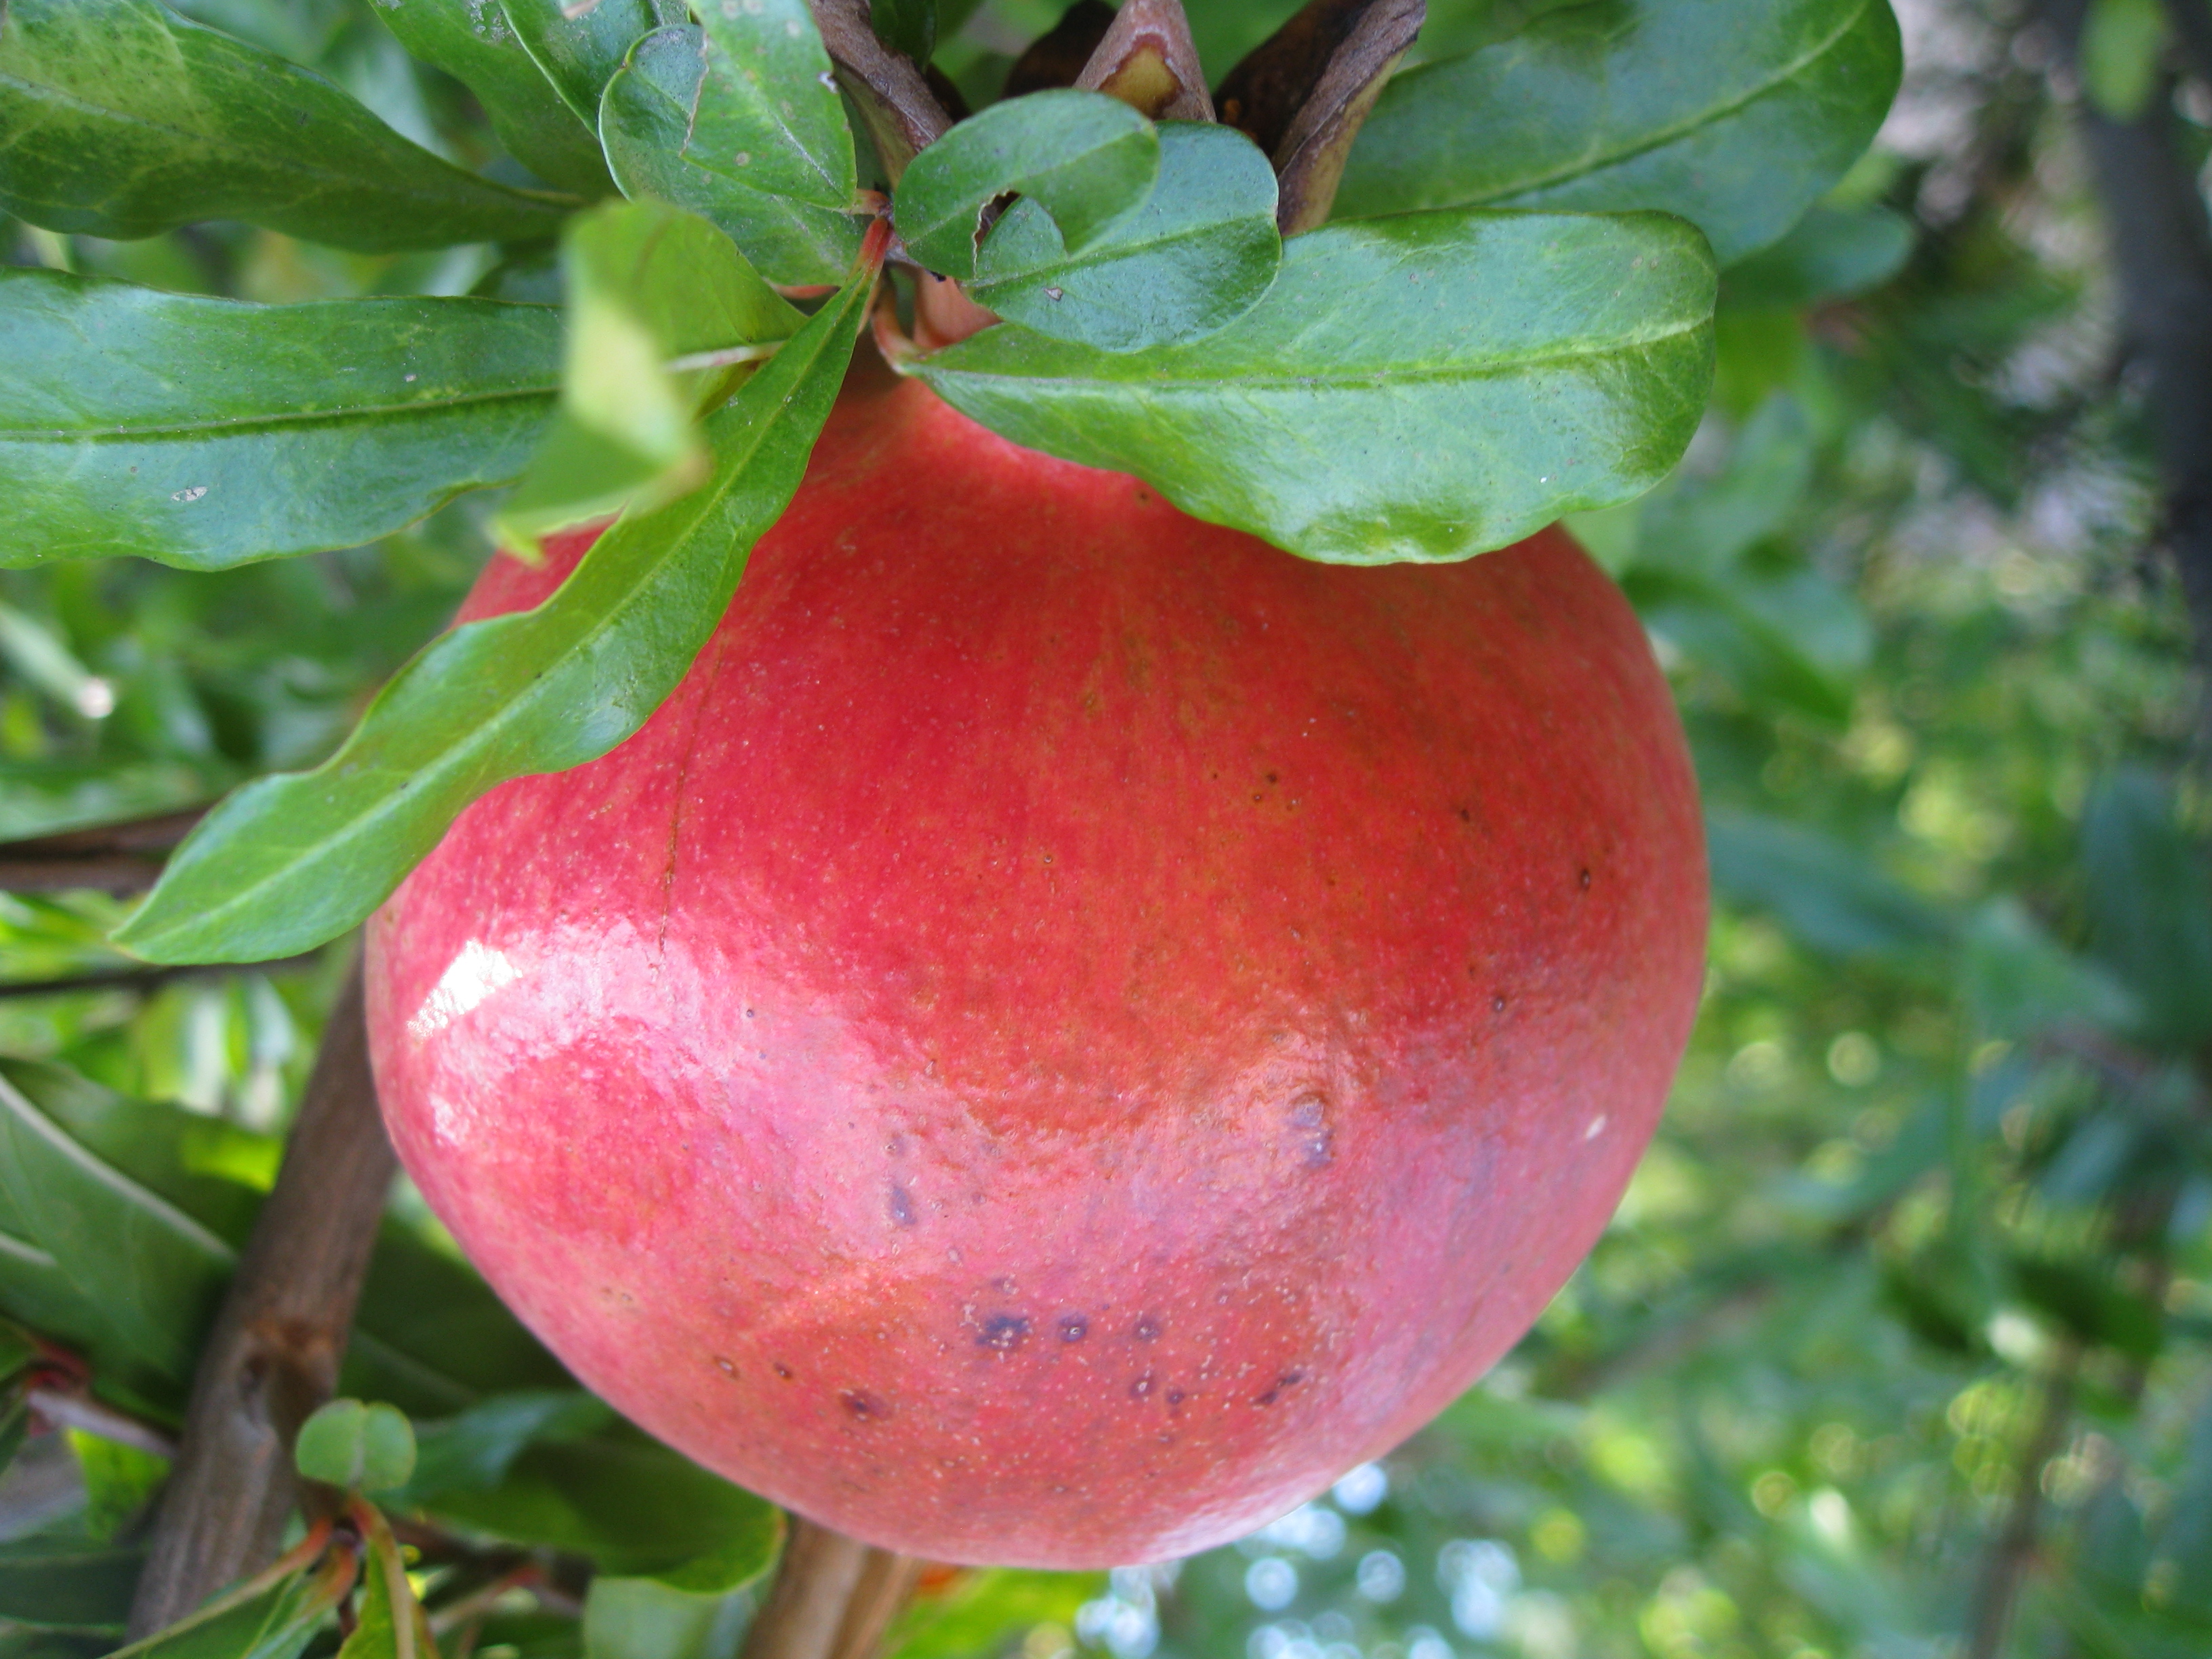 One of several Pomegranate trees on the property.